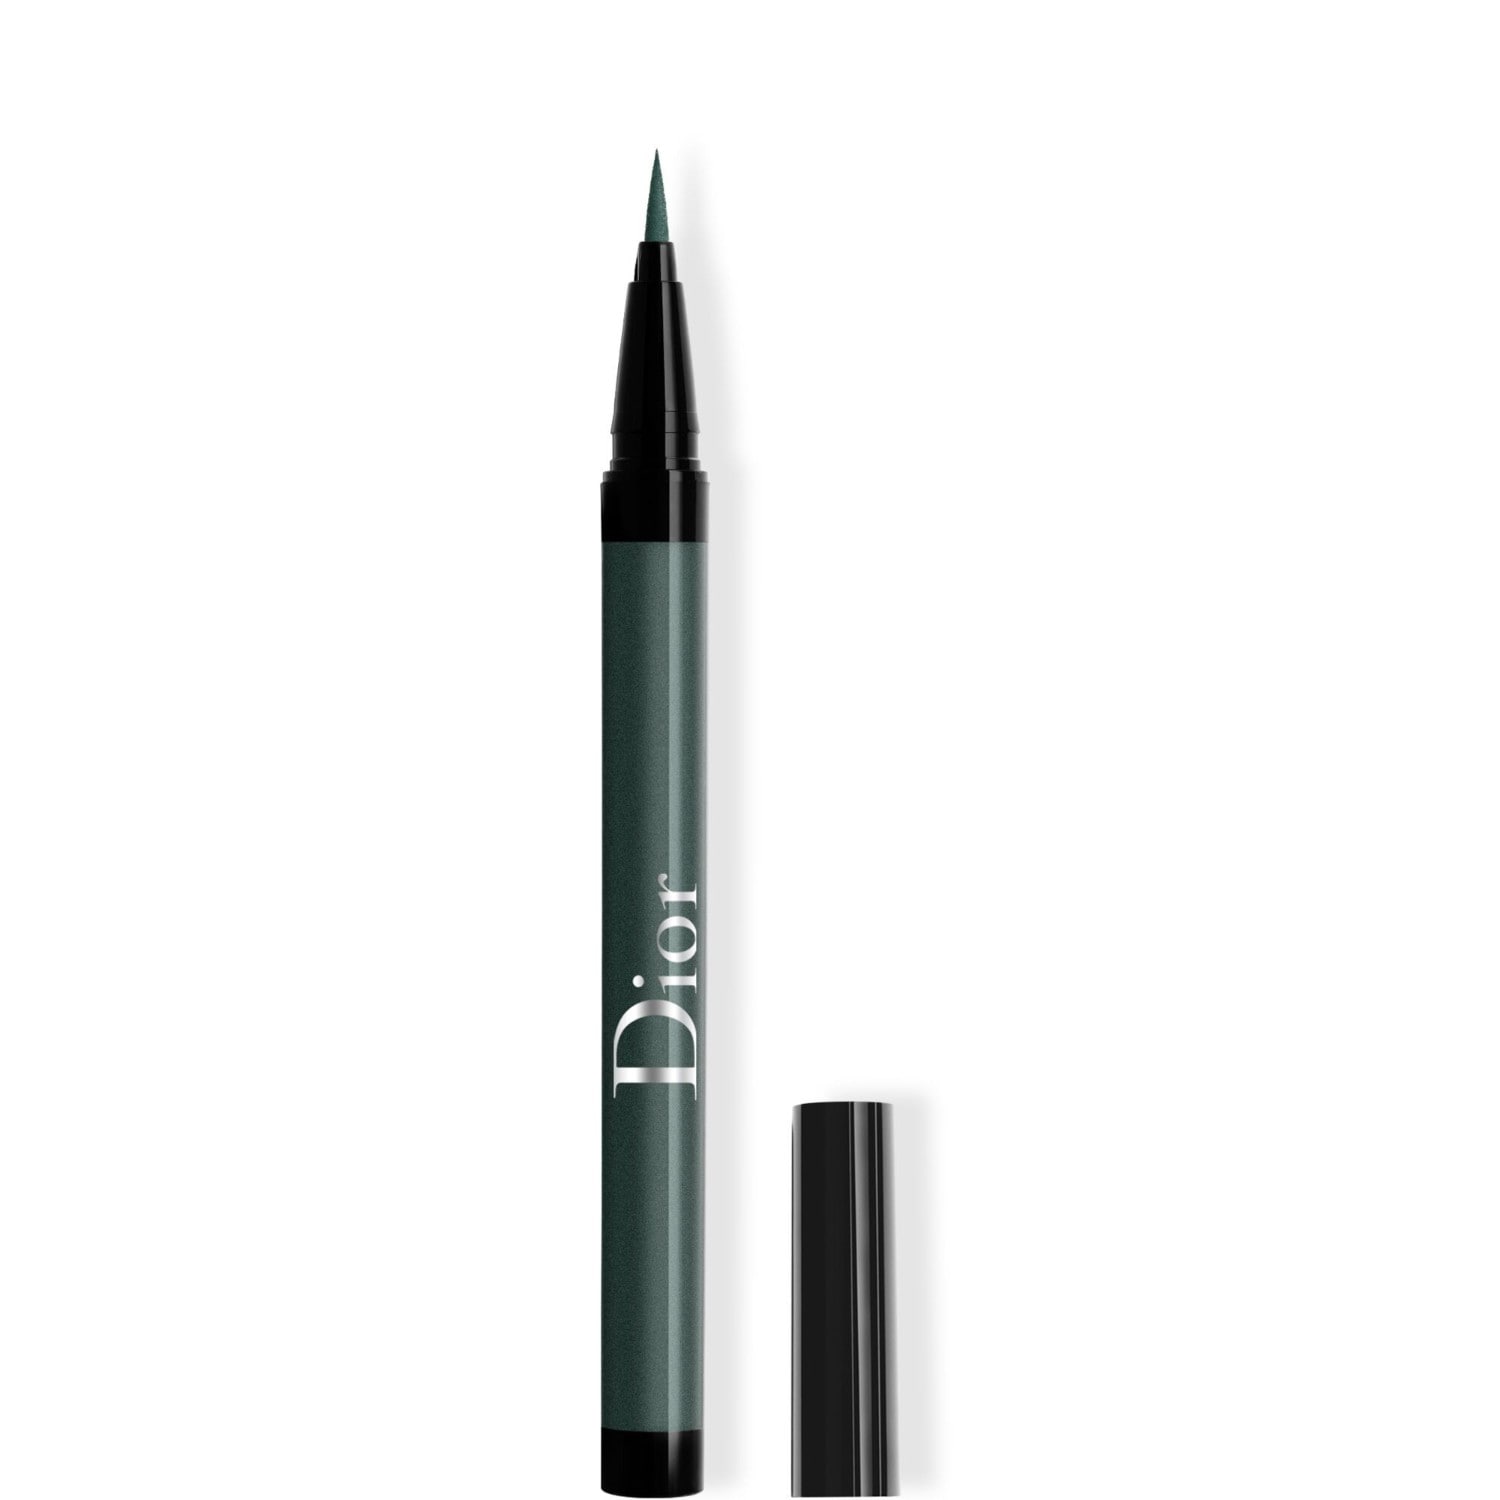 Dior Diorshow on Stage Liner, No. 386 - Pearly Emerald